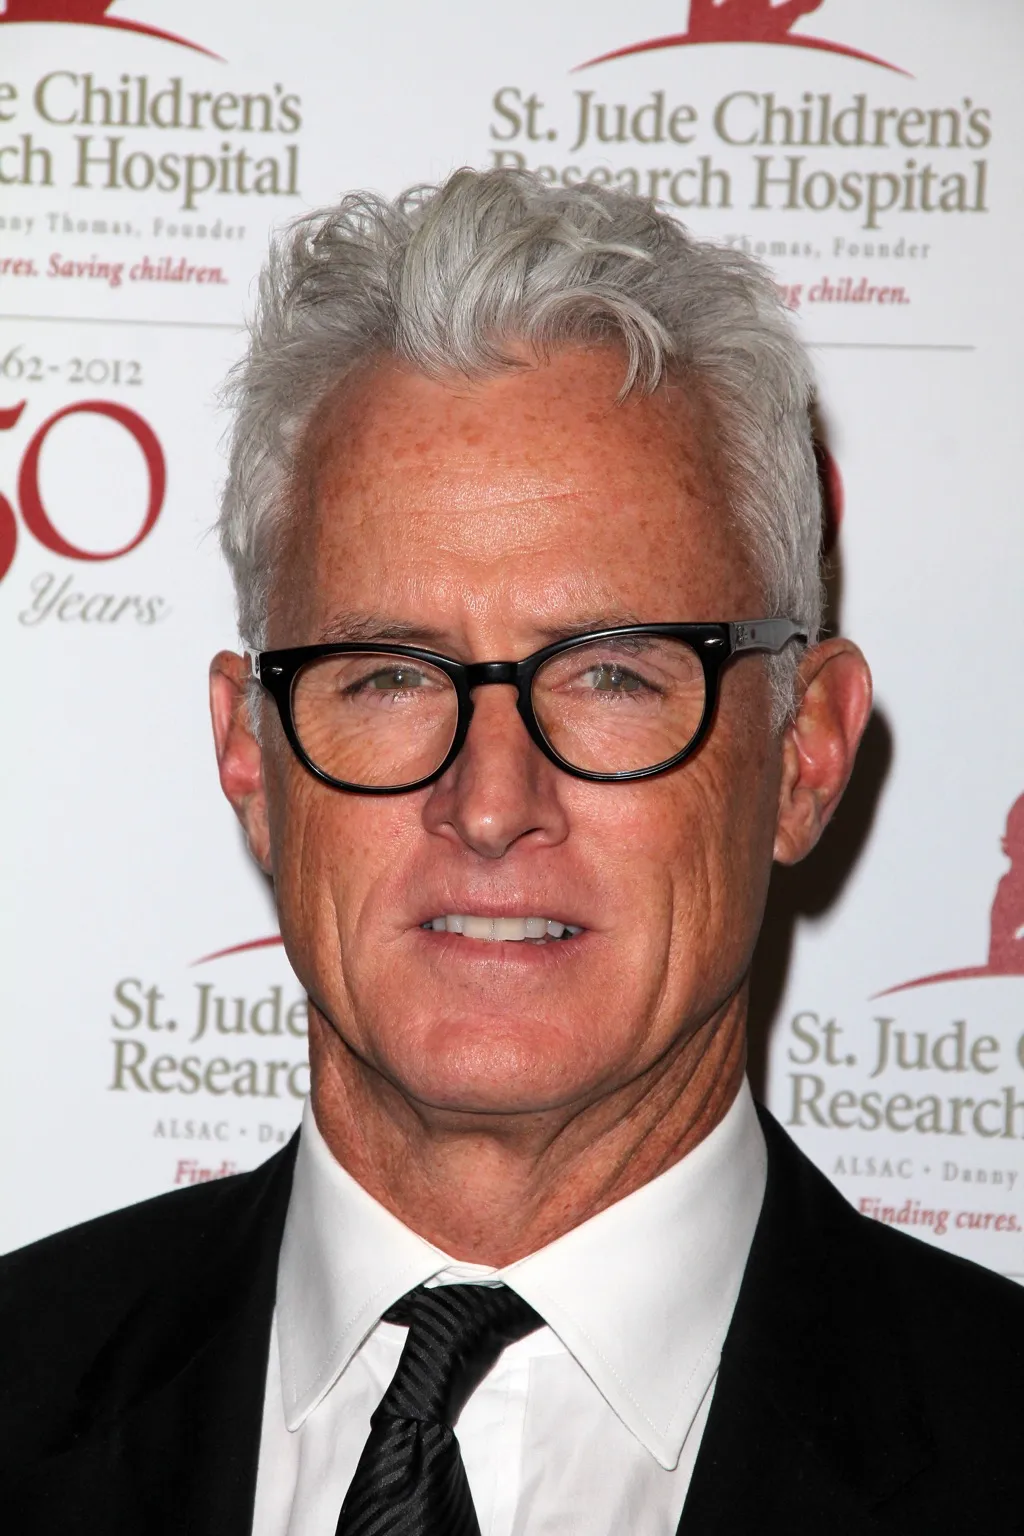 men's haircuts to look younger, starring John Slattery